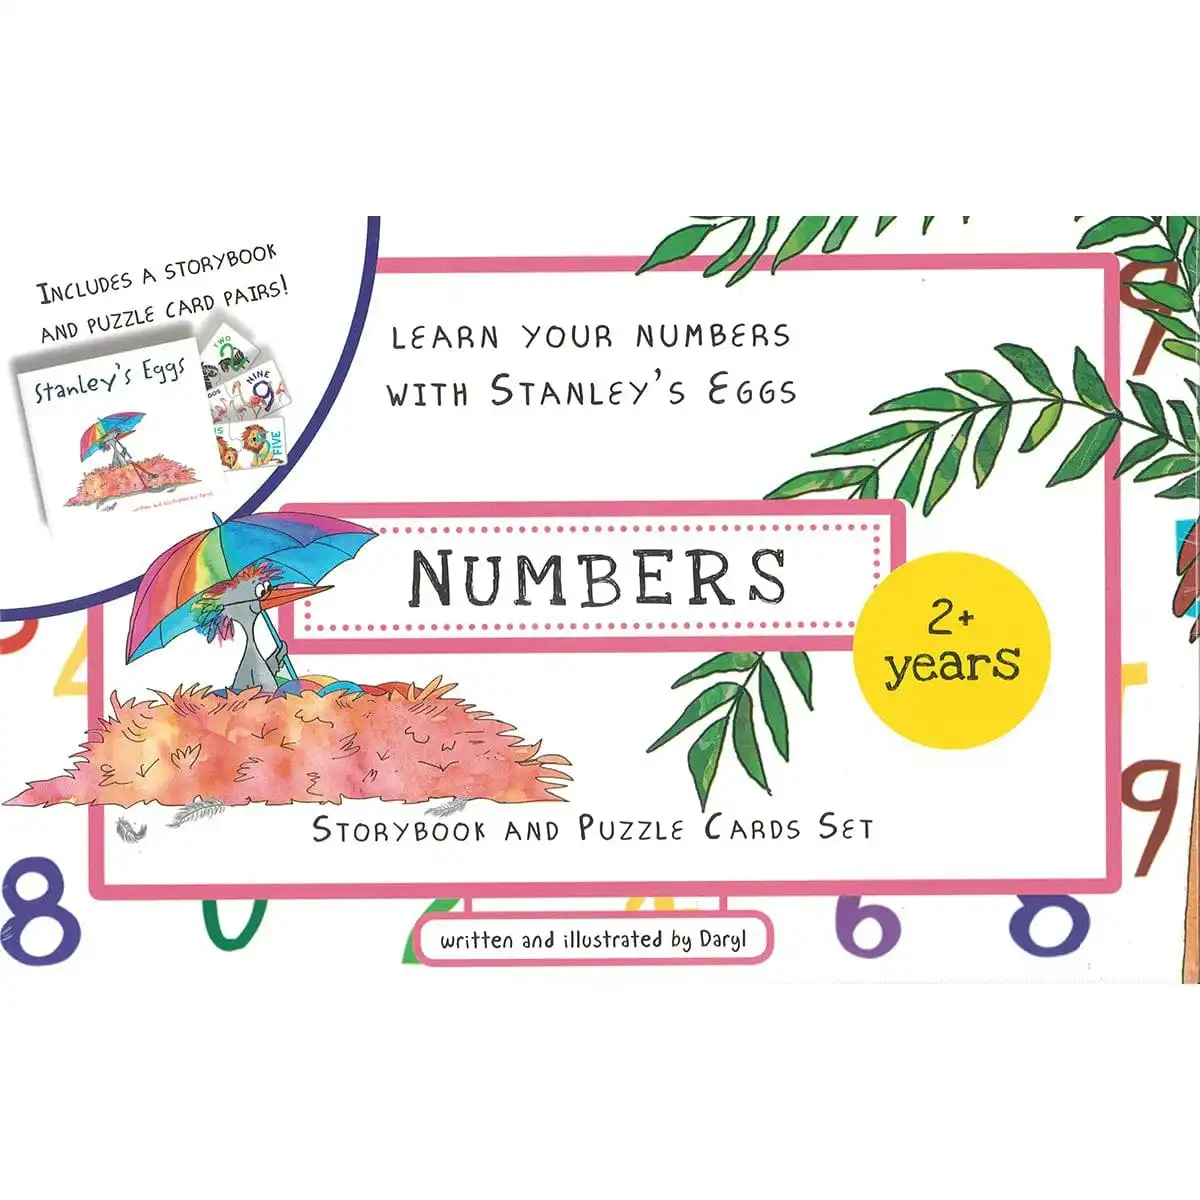 Promotional Learn Your Numbers With Stanley's Eggs